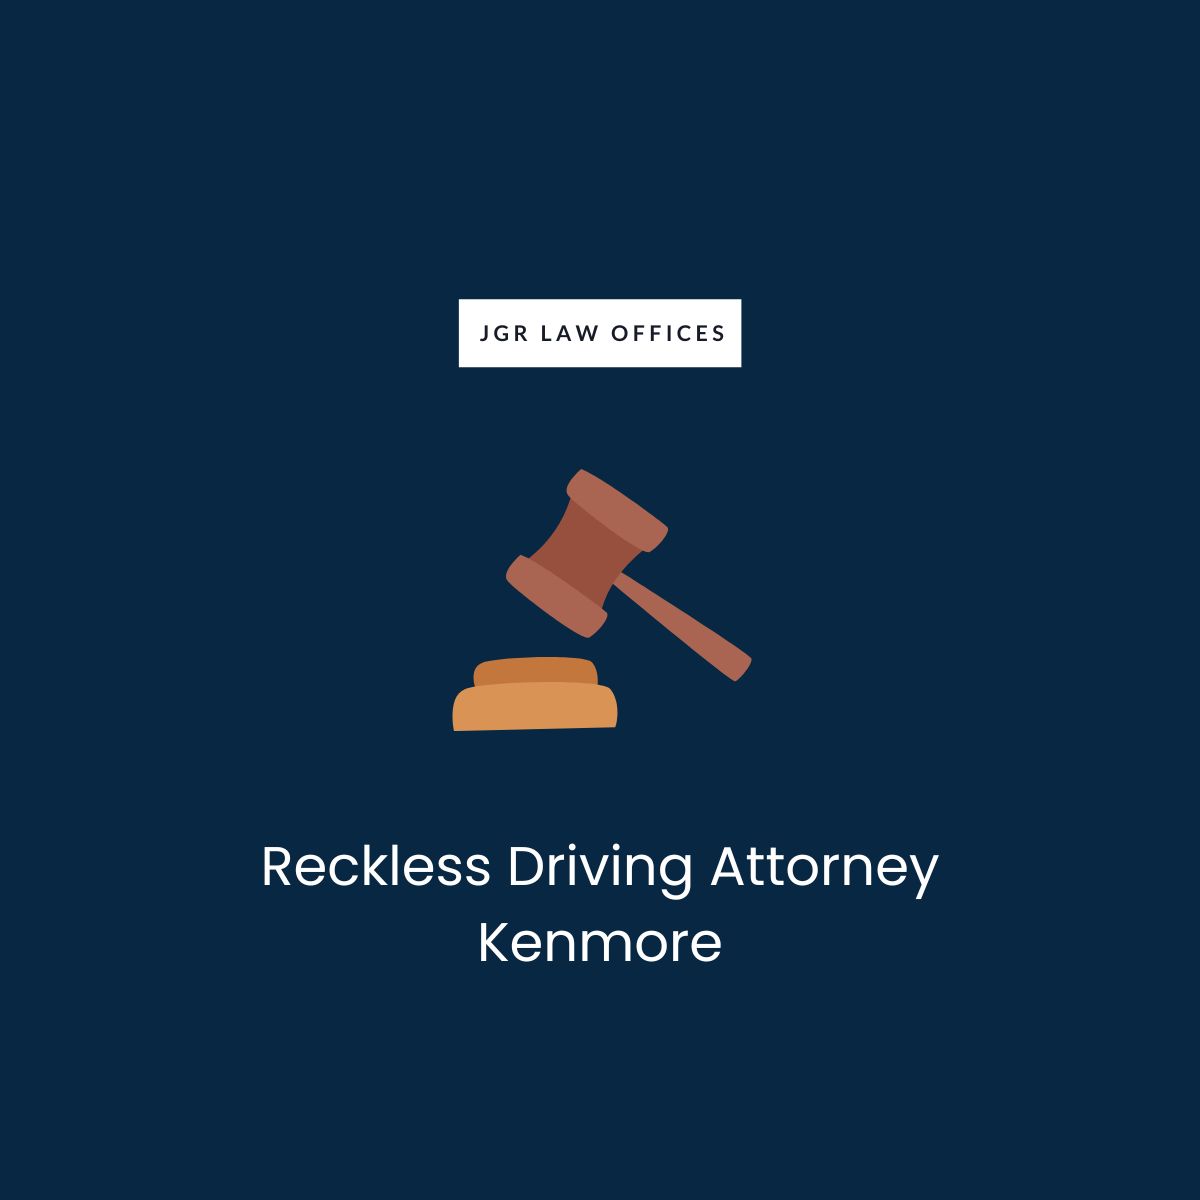 Reckless Driving Attorney Kenmore Reckless Driving